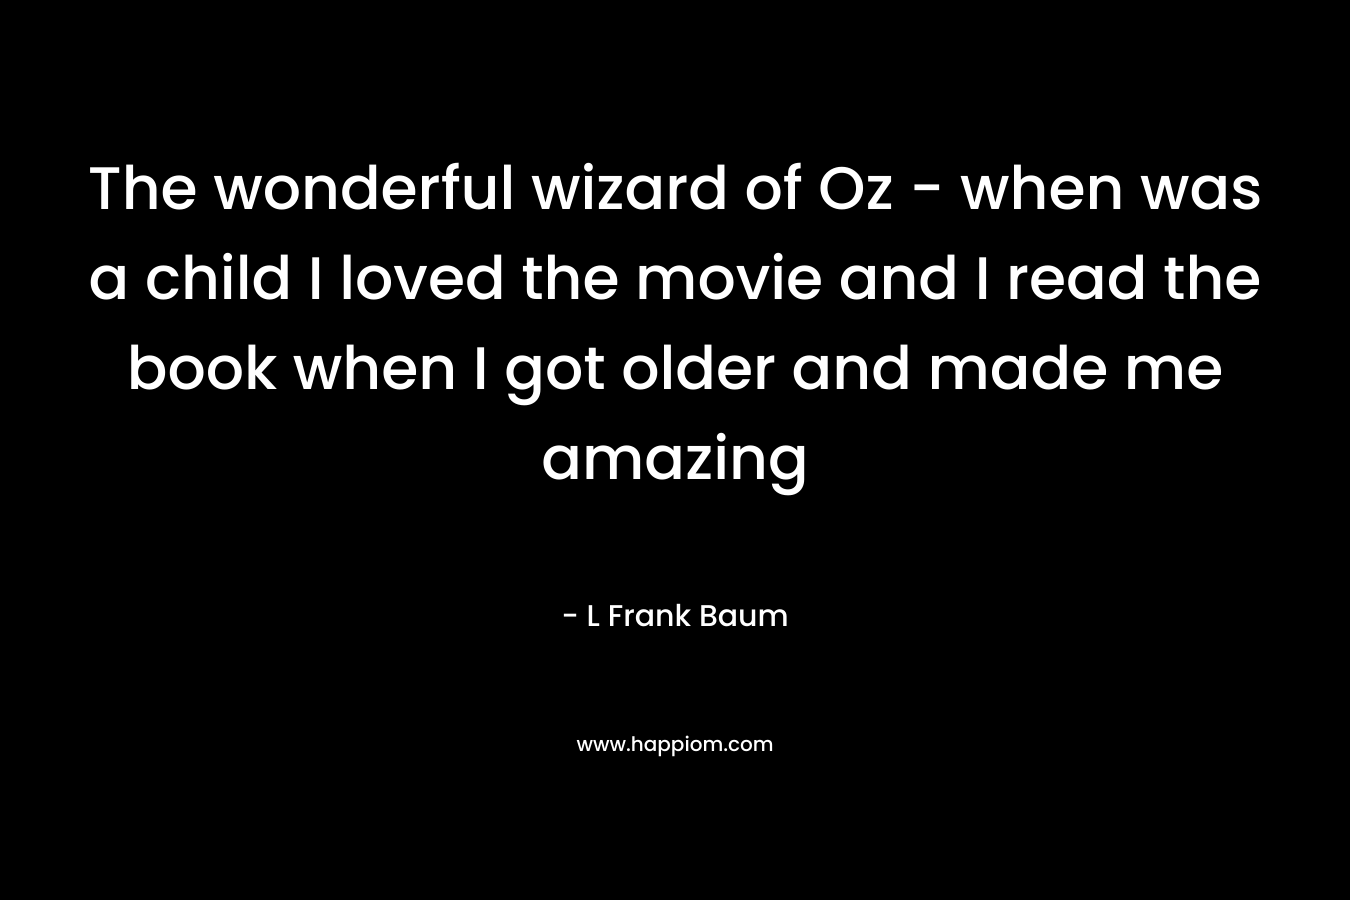 The wonderful wizard of Oz – when was a child I loved the movie and I read the book when I got older and made me amazing – L Frank Baum